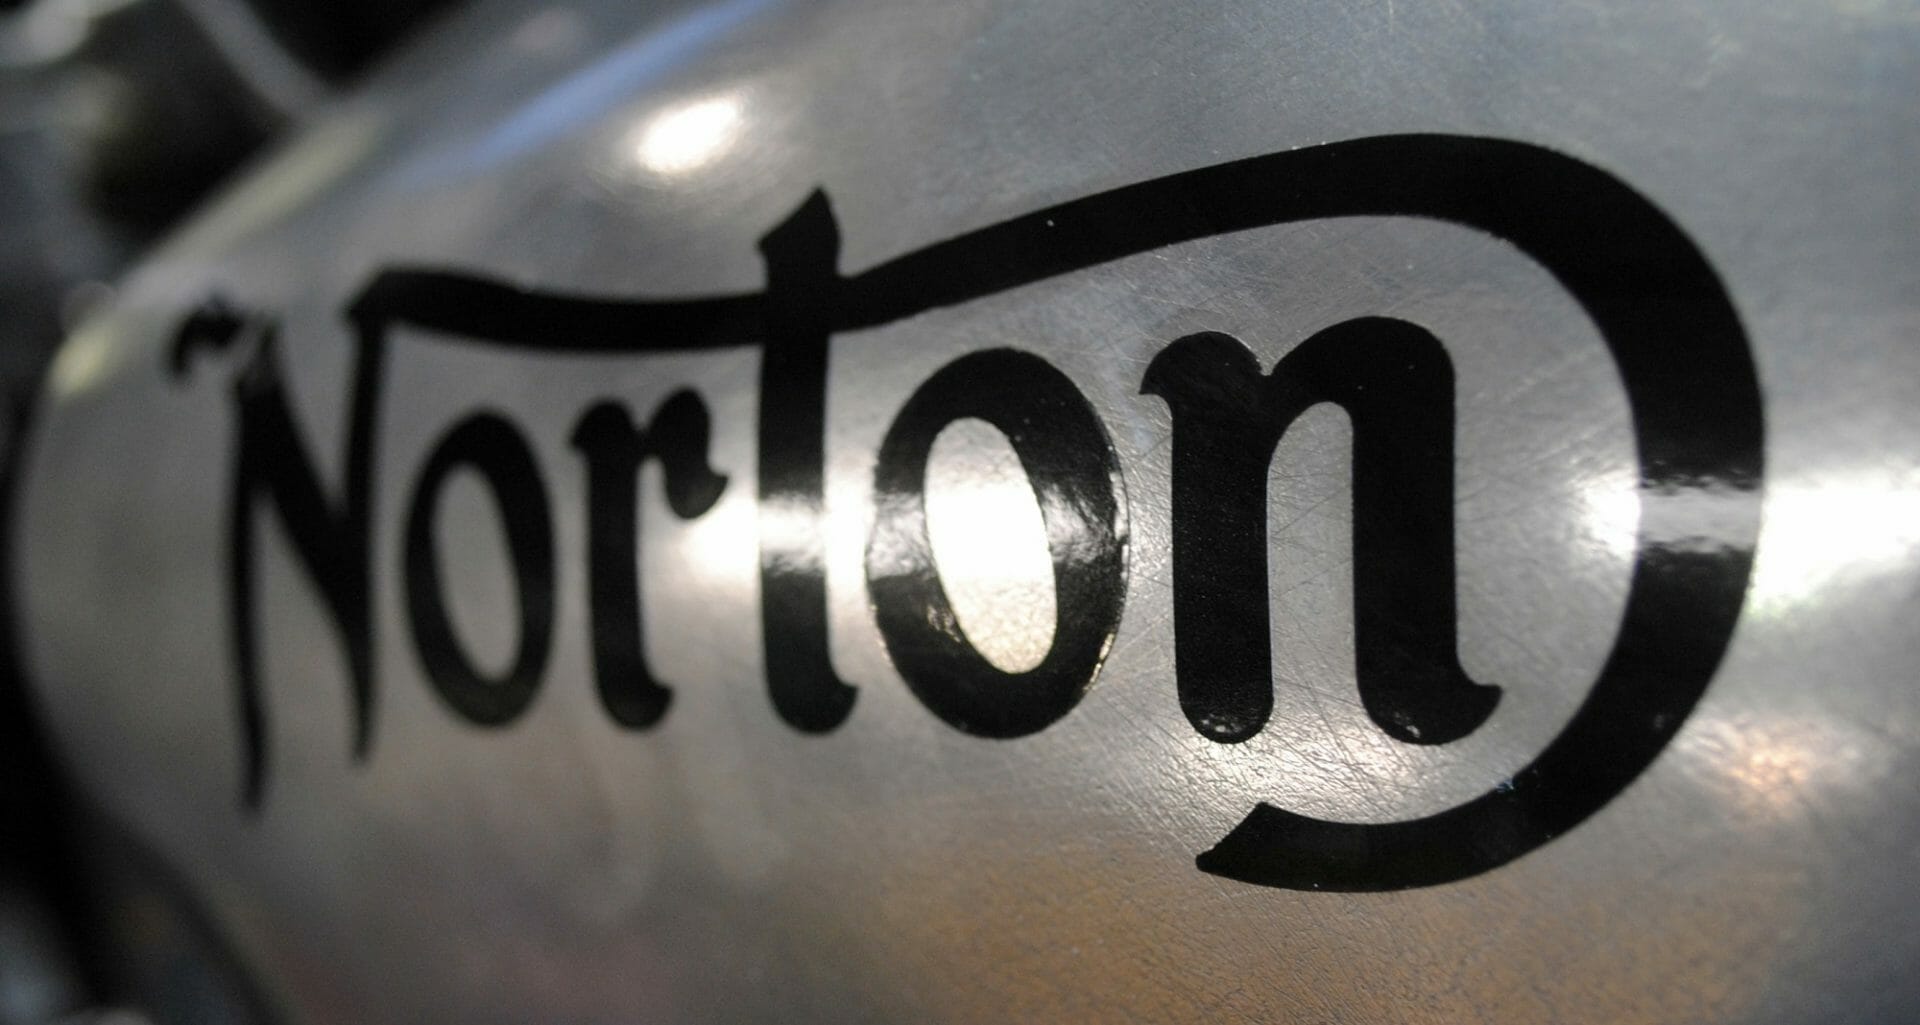 Norton Motorcycles: New horizons in sight